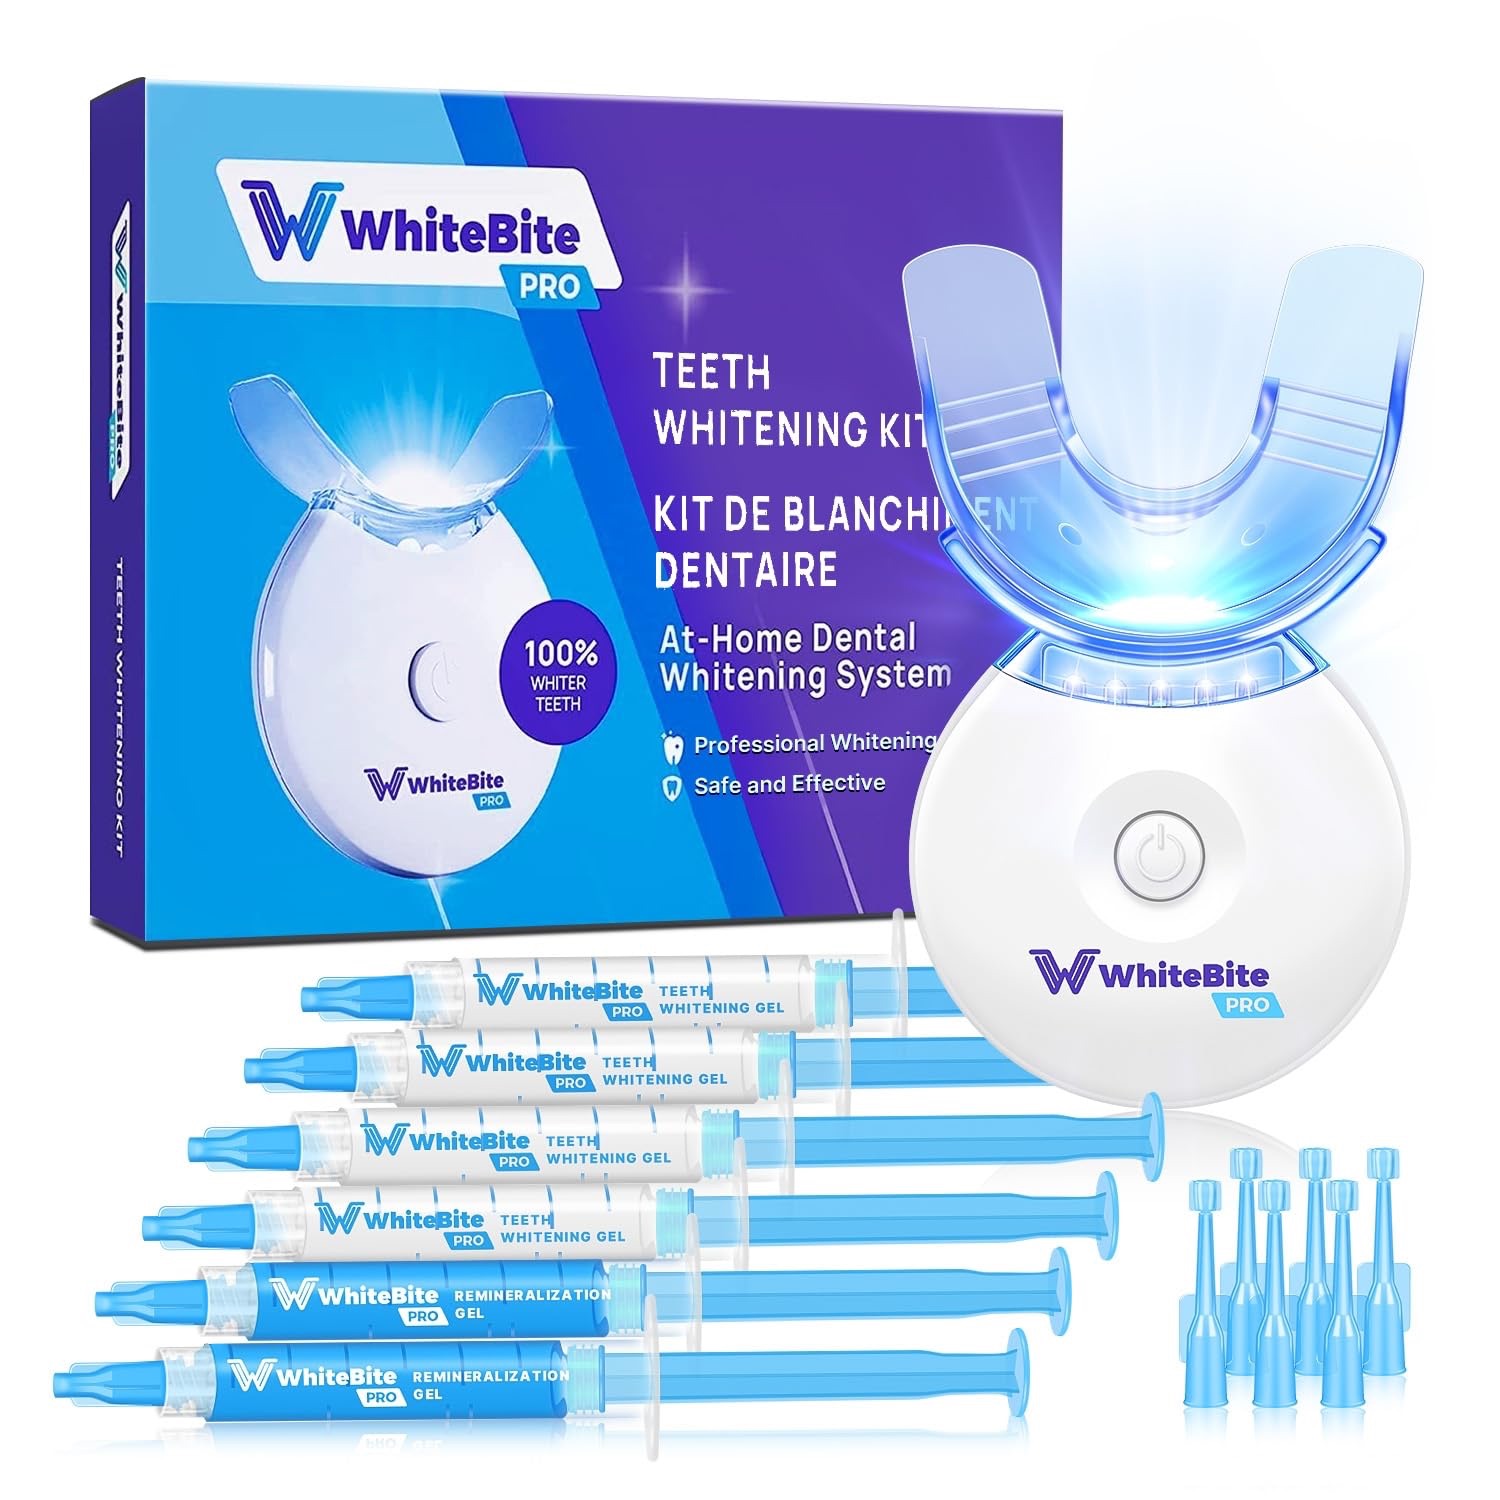 Whitebite Pro Teeth Whitening Kit with LED Light for Sensitive Teeth, Tooth Whitening System with 35% Carbamide Peroxide, (4)3ml Gel Syringes, (2)Remineralization Gel, and Mouth Tray, 7 Piece Set : Am